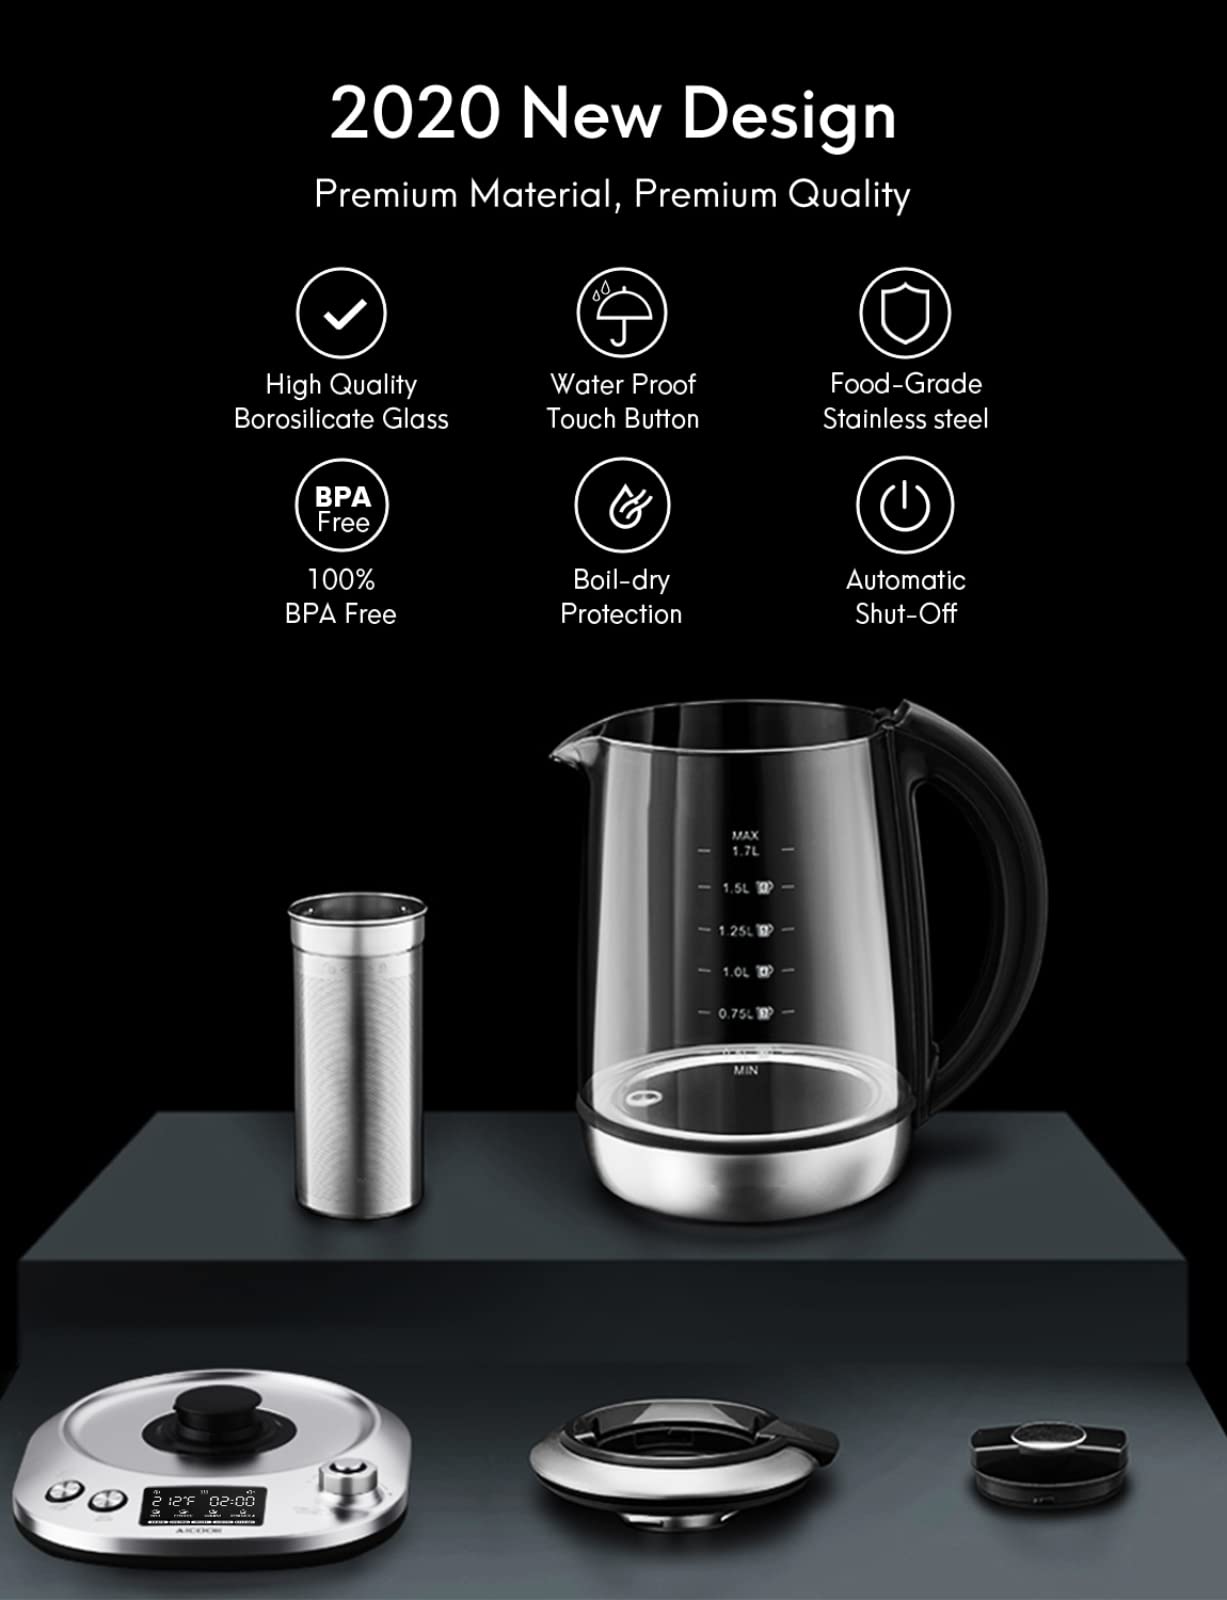 Automatic & Electric Tea Kettles